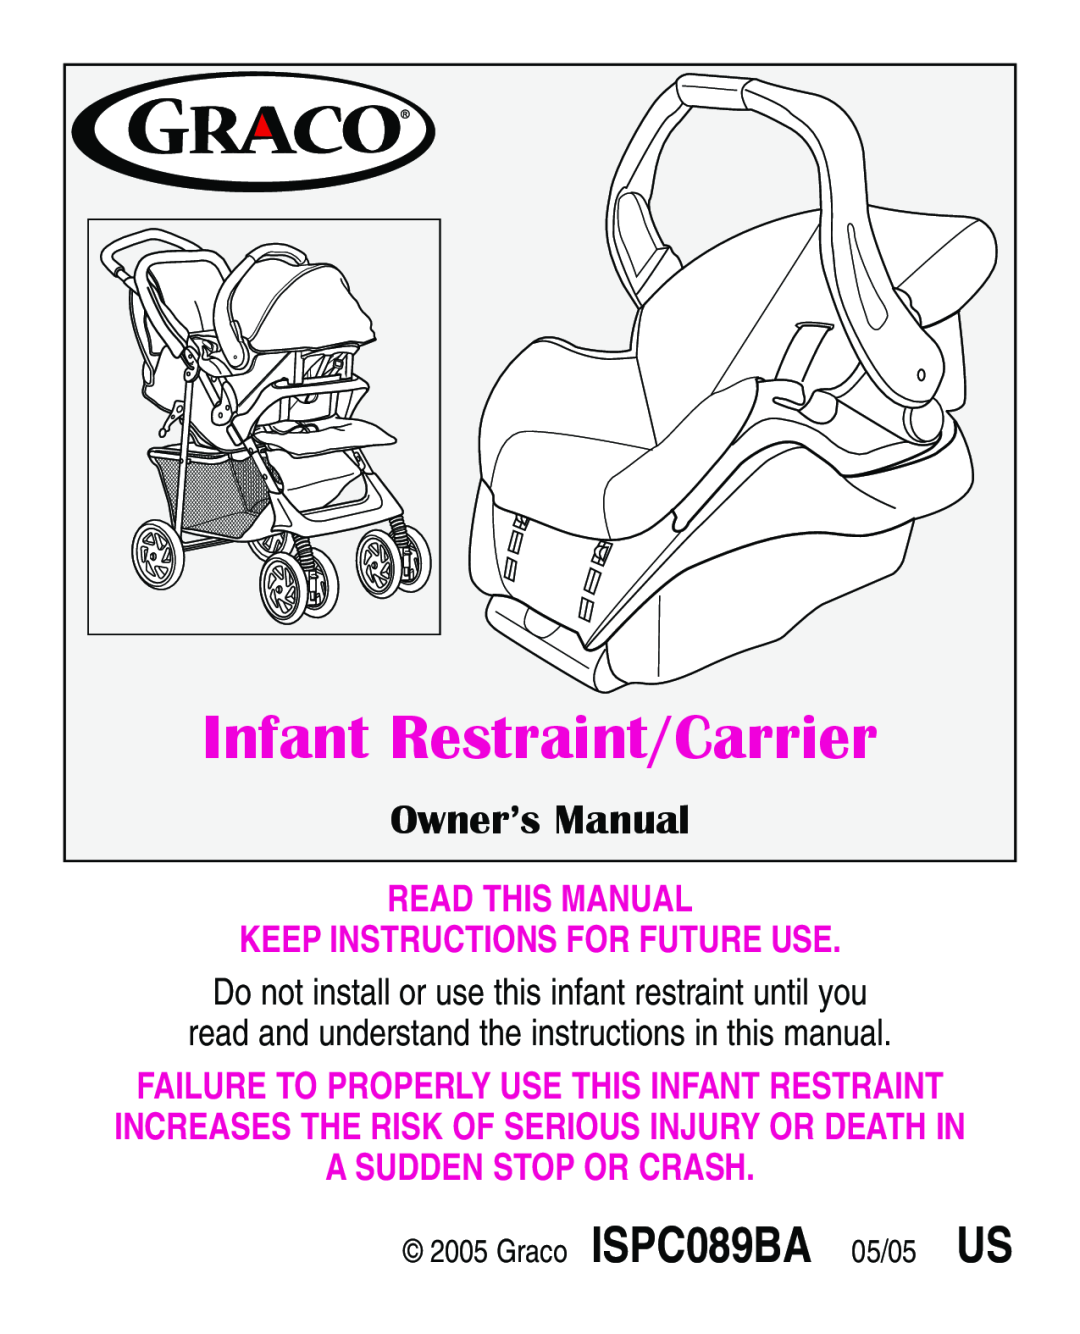 Graco ISPA109AC manual Owner’s Manual, Read This Manual Keep Instructions For Future Use, Infant Restraint/Carrier 